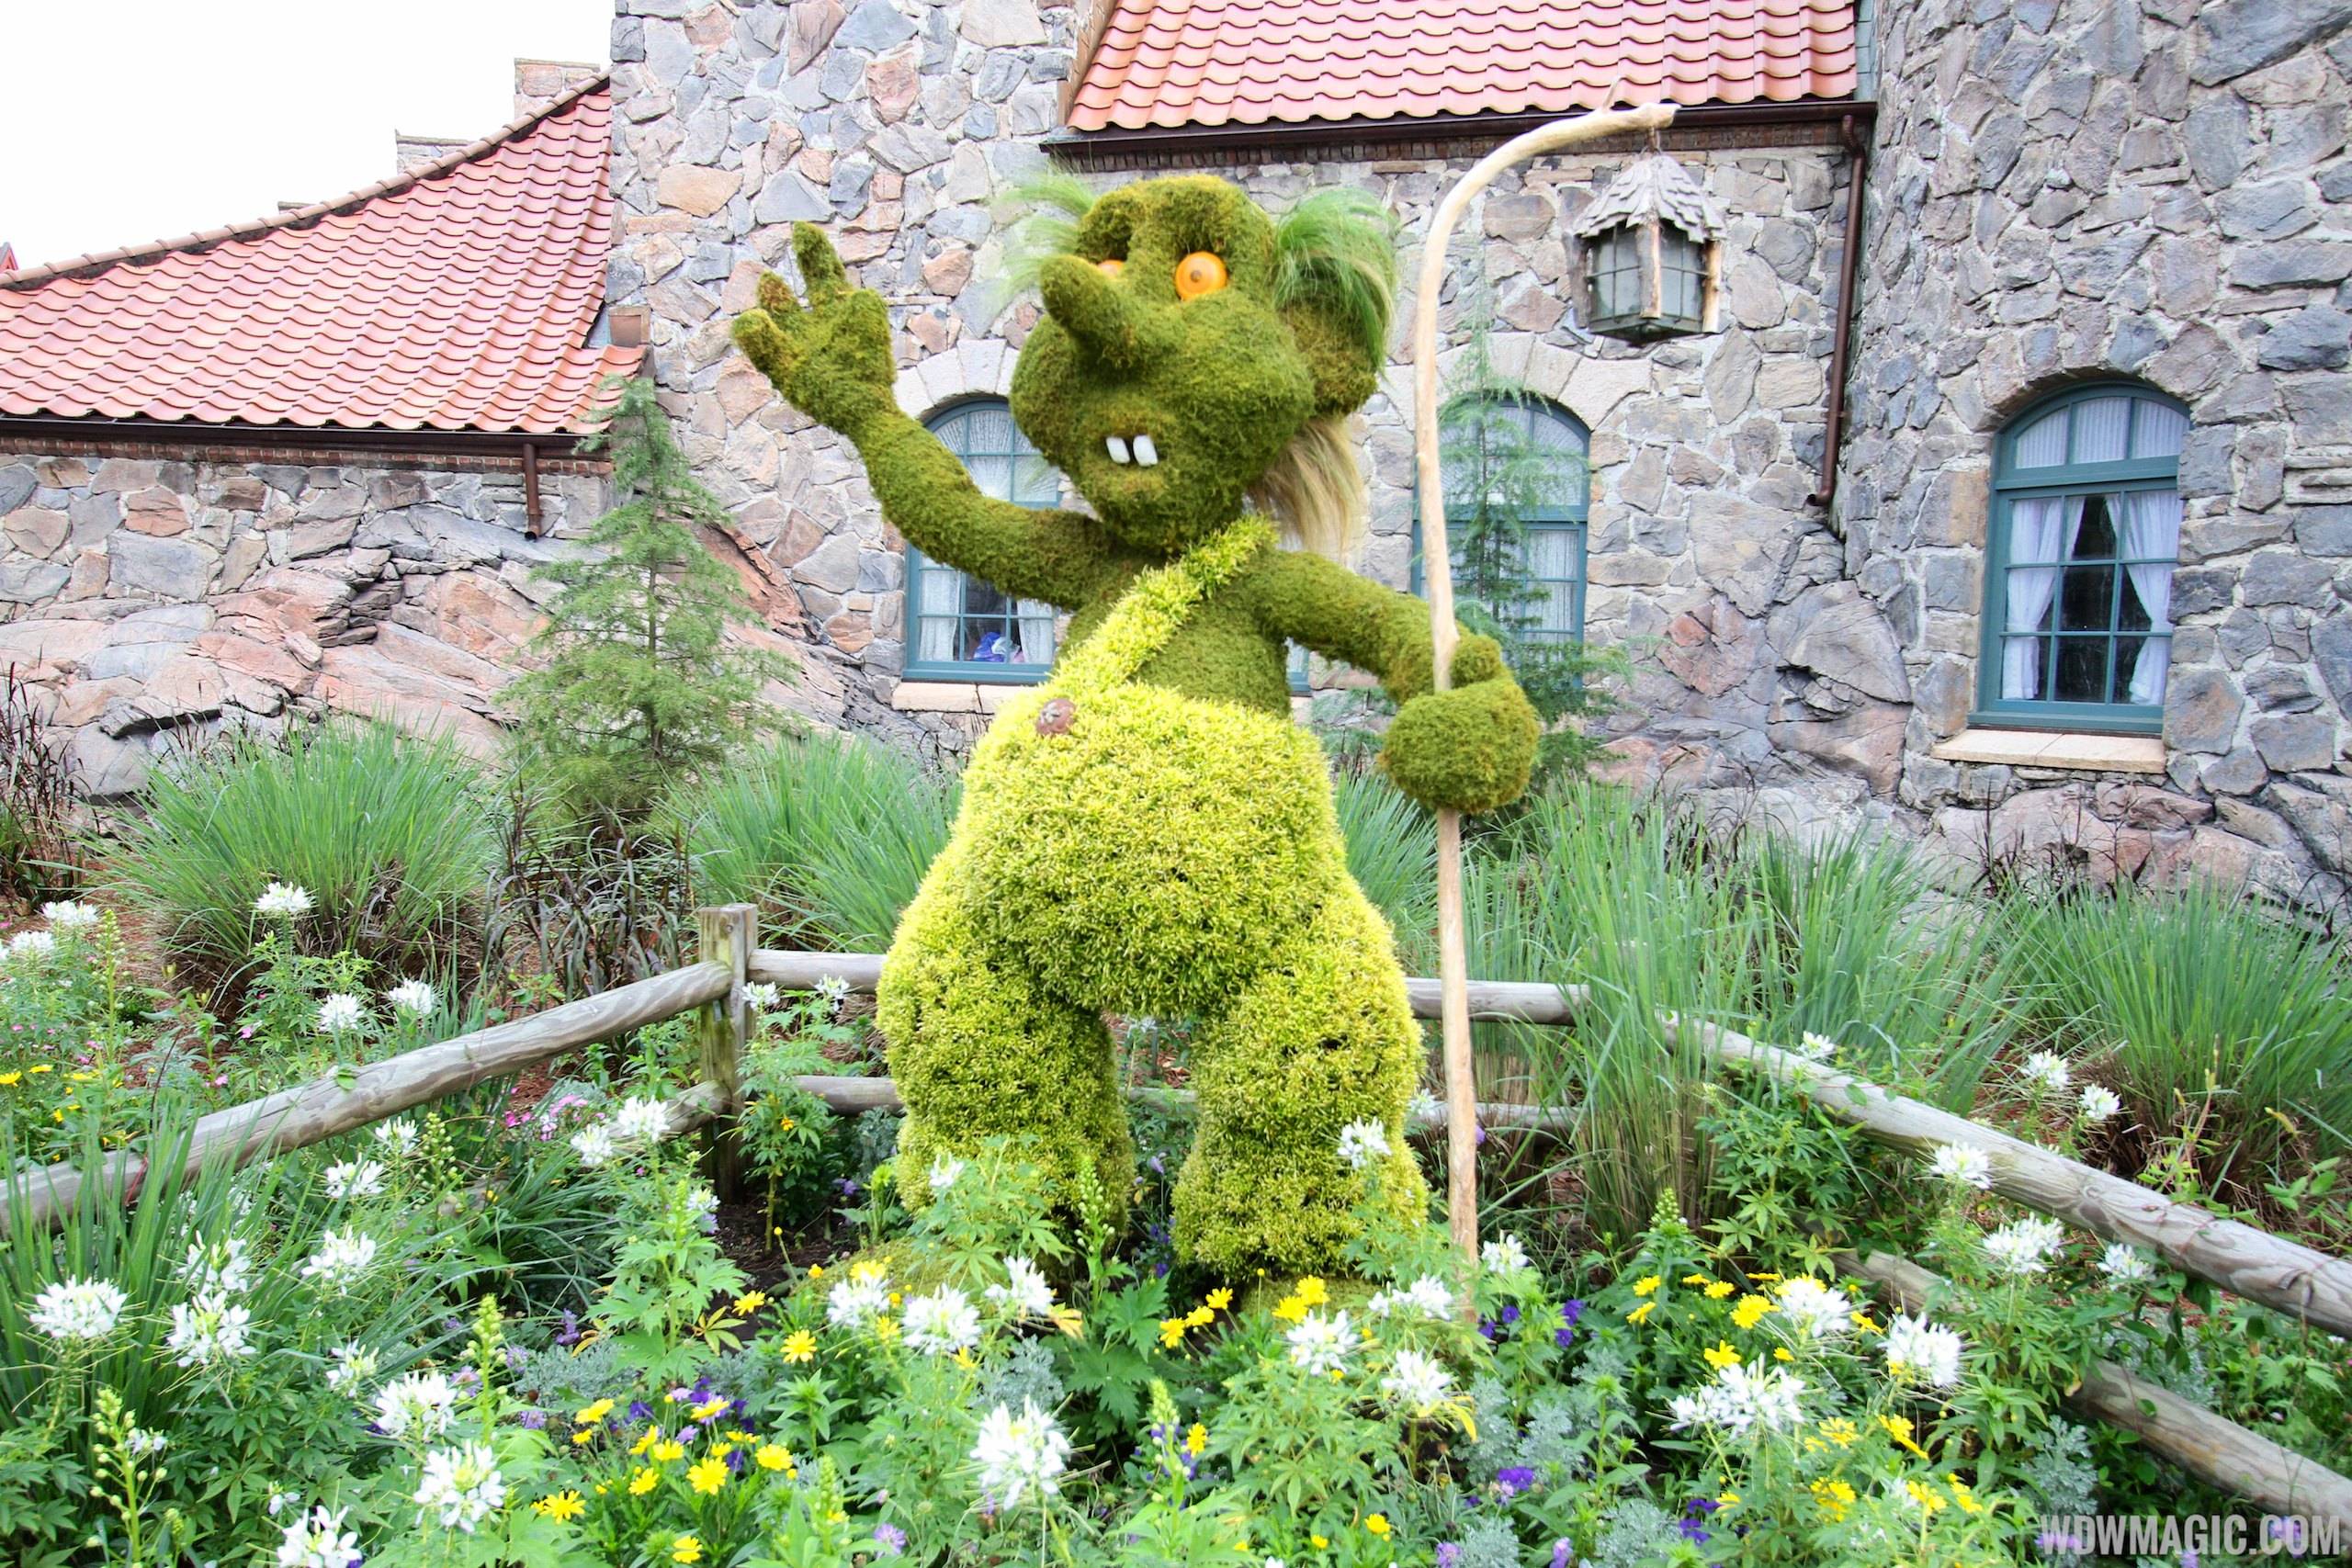 2014 Epcot Flower and Garden Festival - Norway topiary